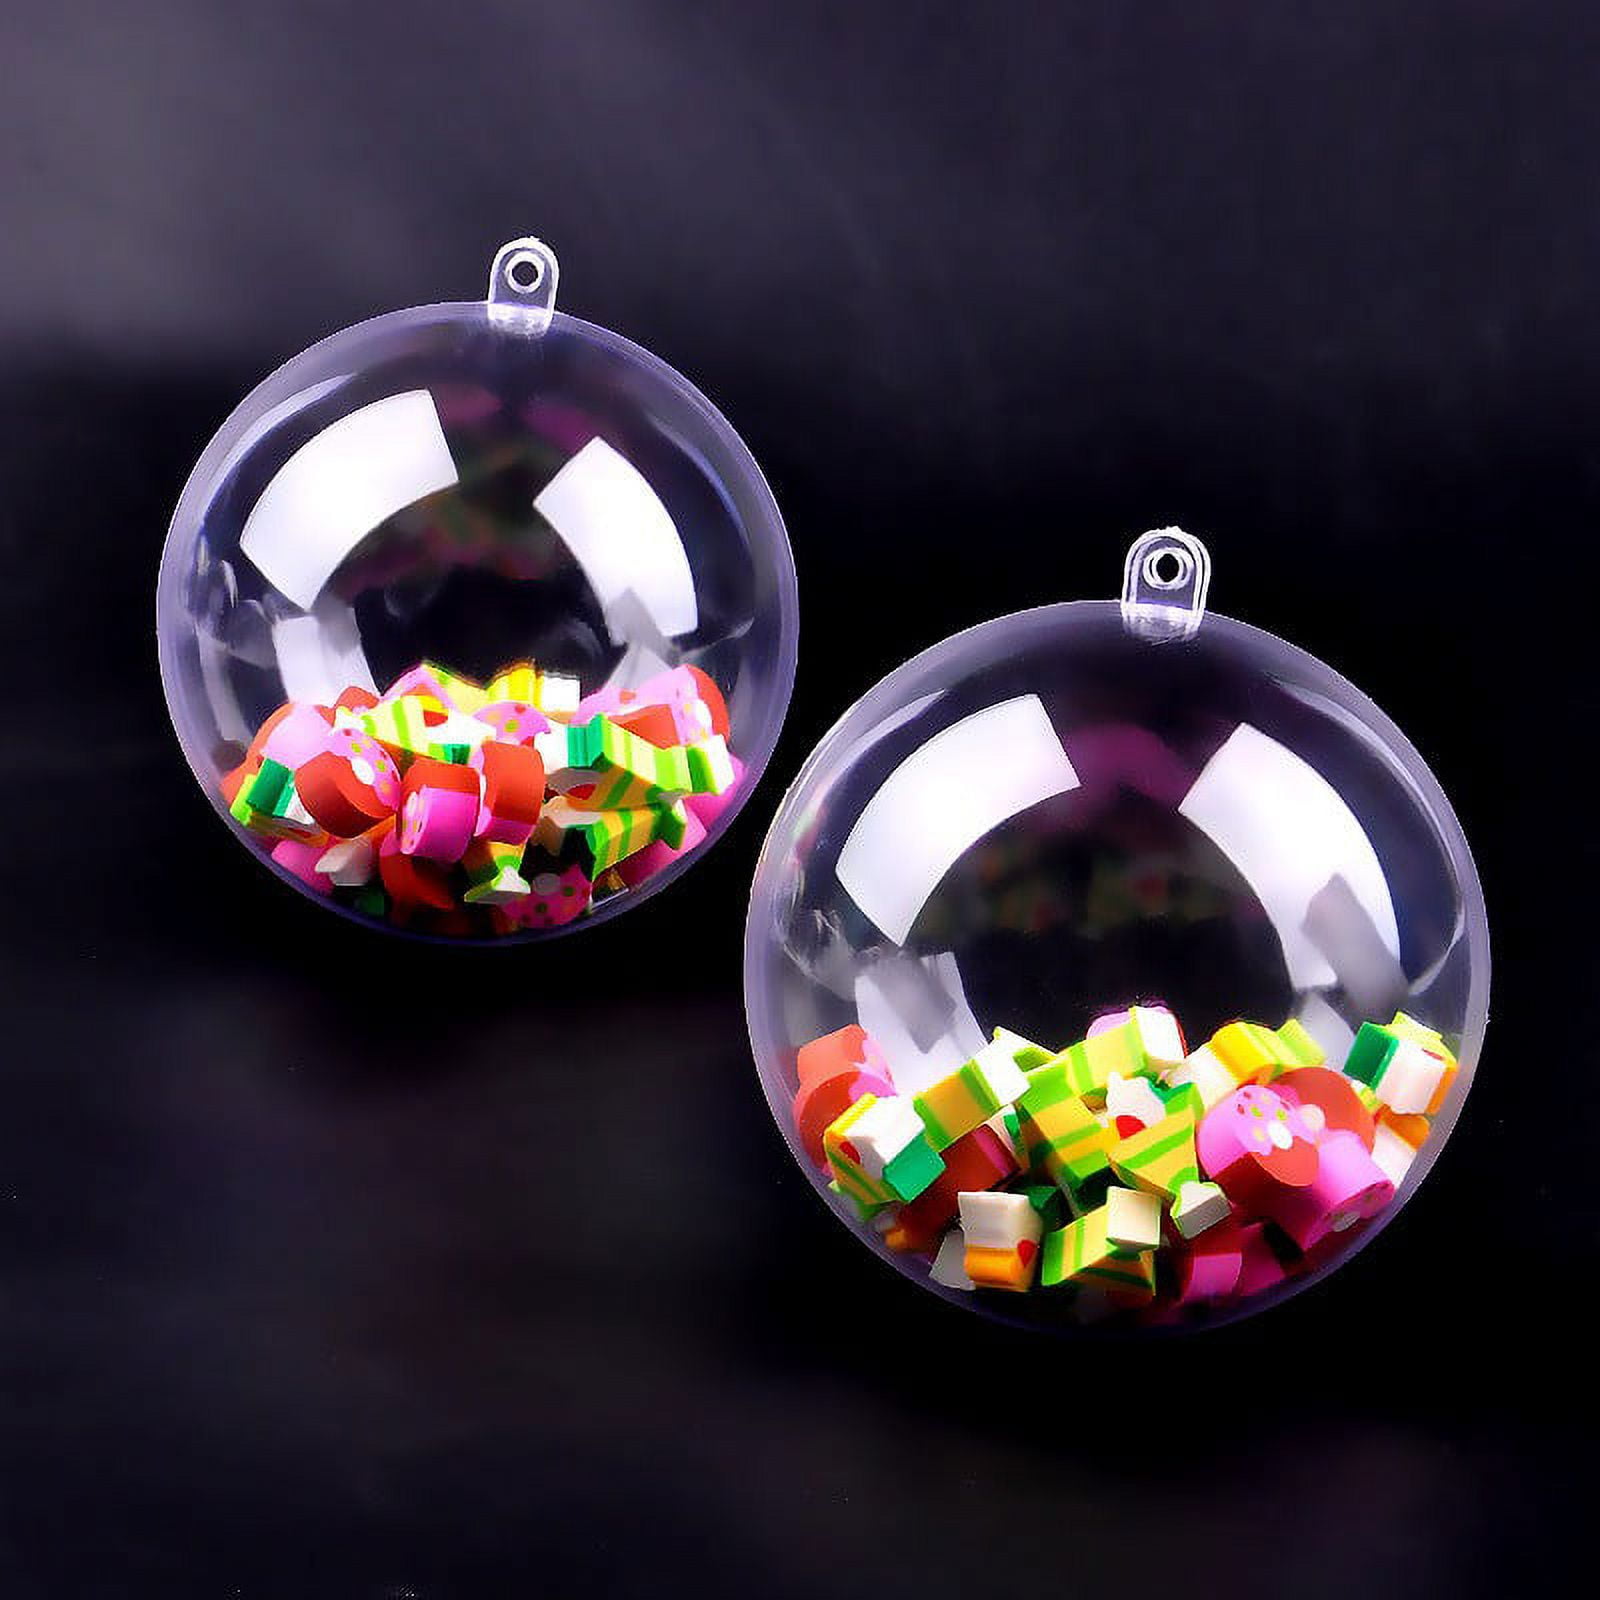 5/10pcs Clear Plastic Fillable Ornaments Ball for Christmas Party